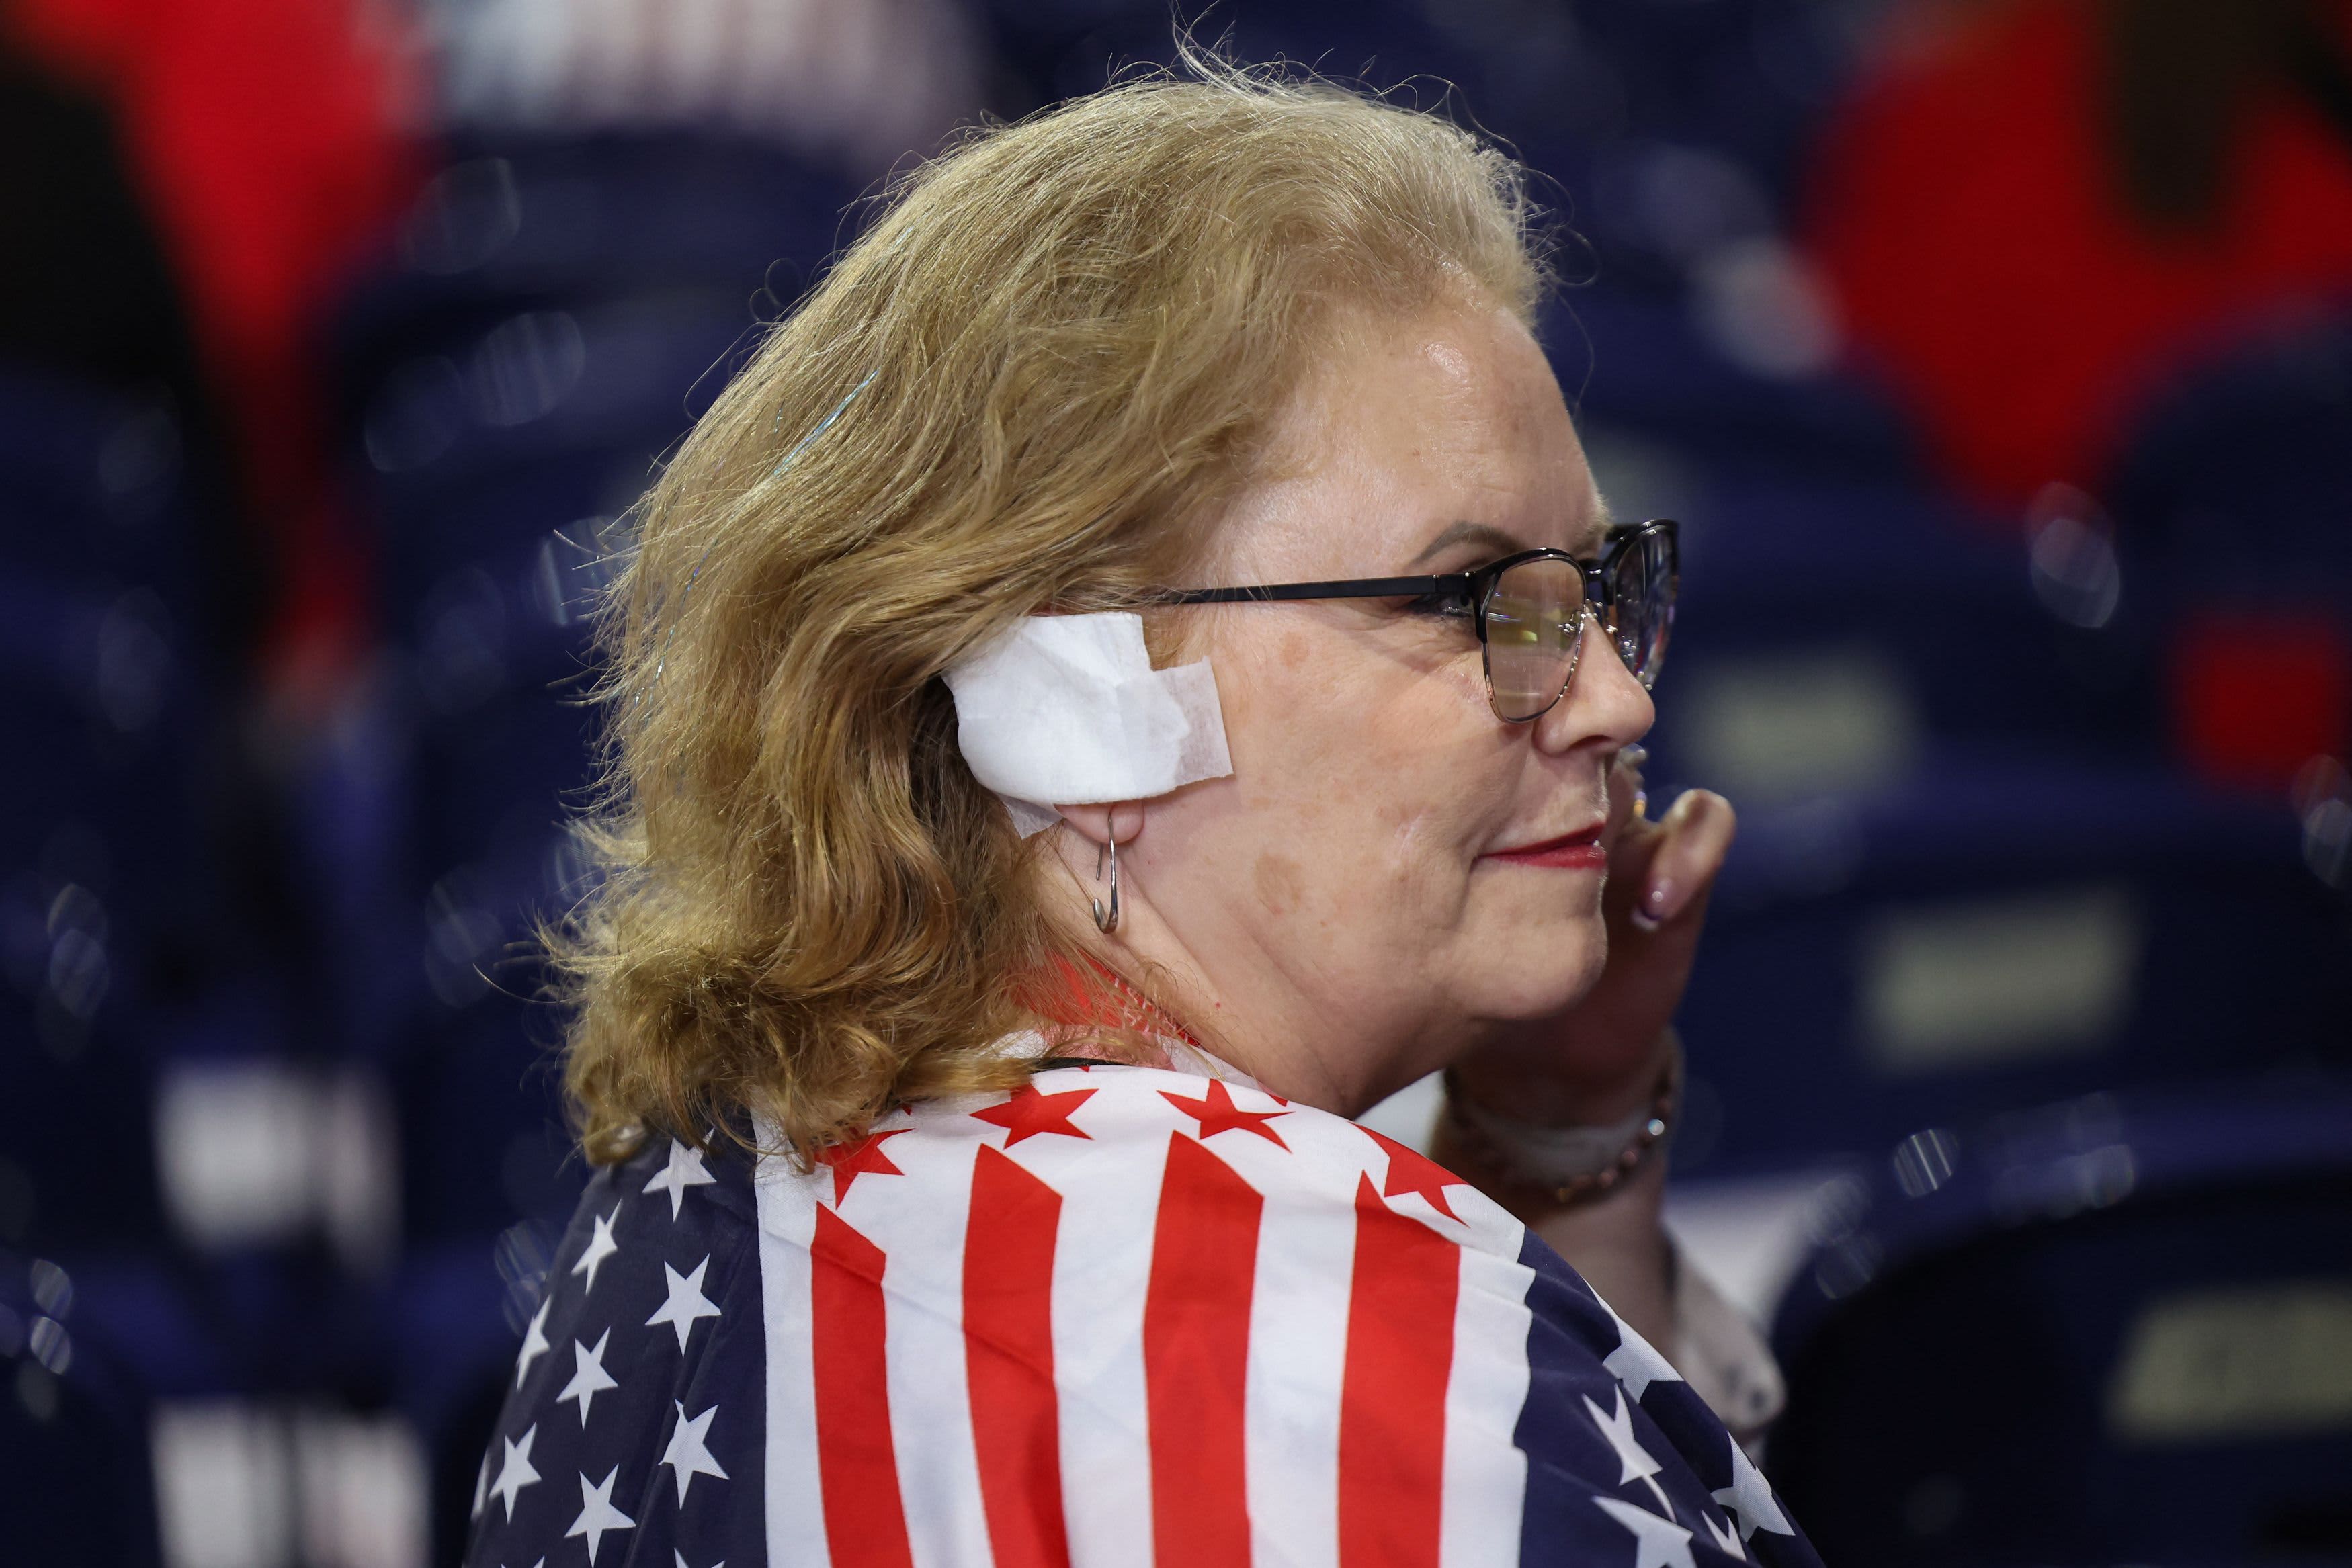 PHOTOS: RNC attendees wear ear bandages ‘in solidarity' with Trump